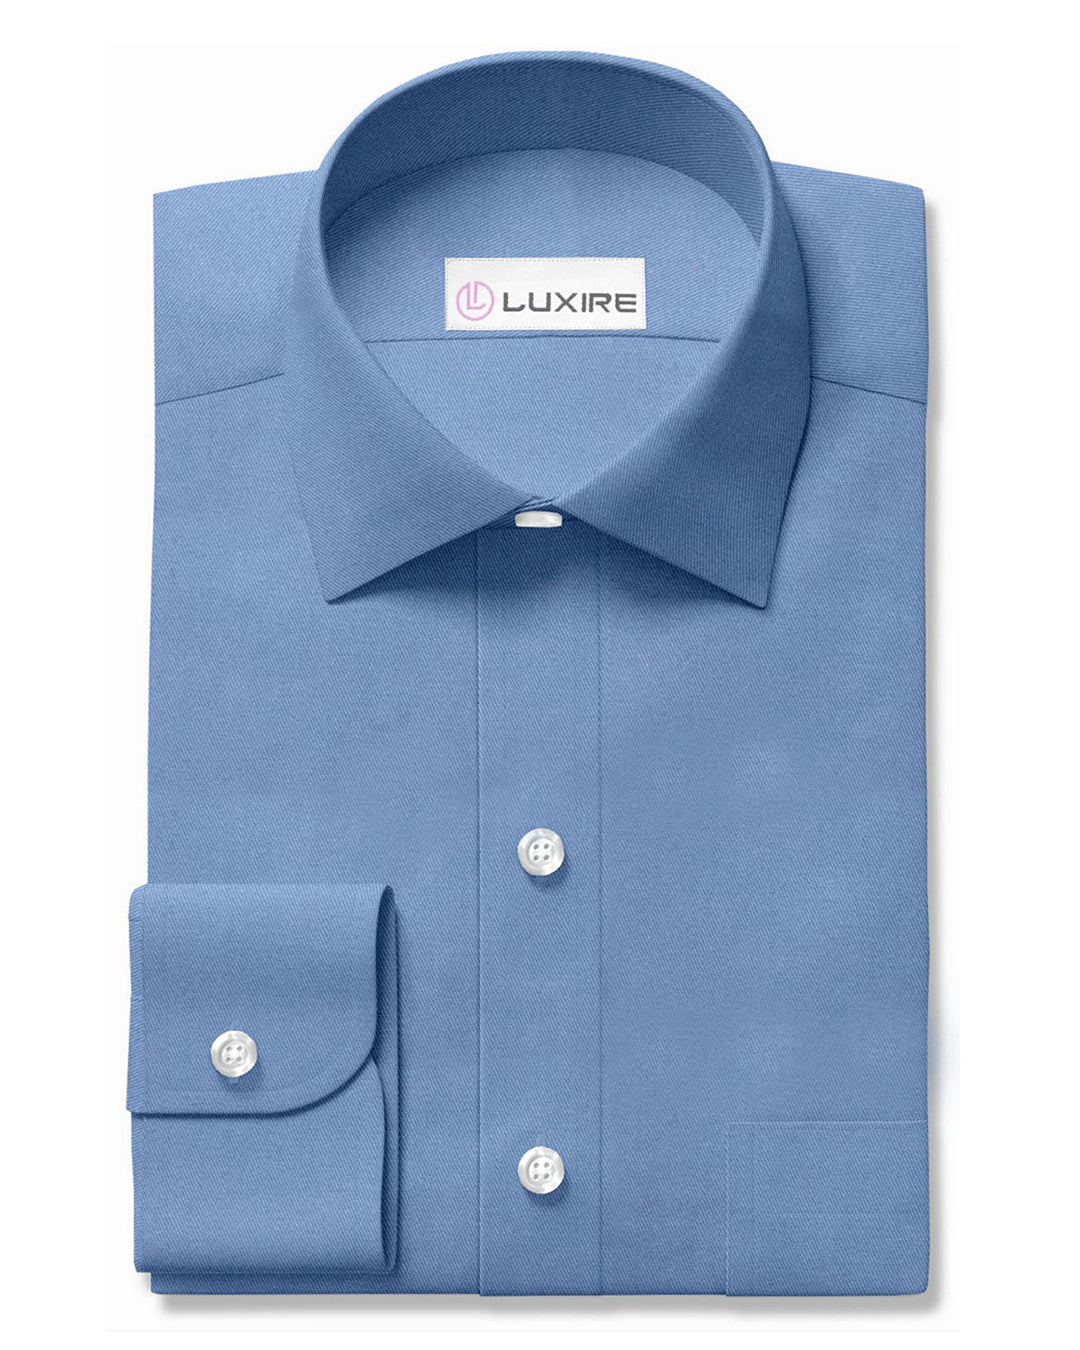 Blue Business Shirt: Soft, Weighty and Wrinkle Free